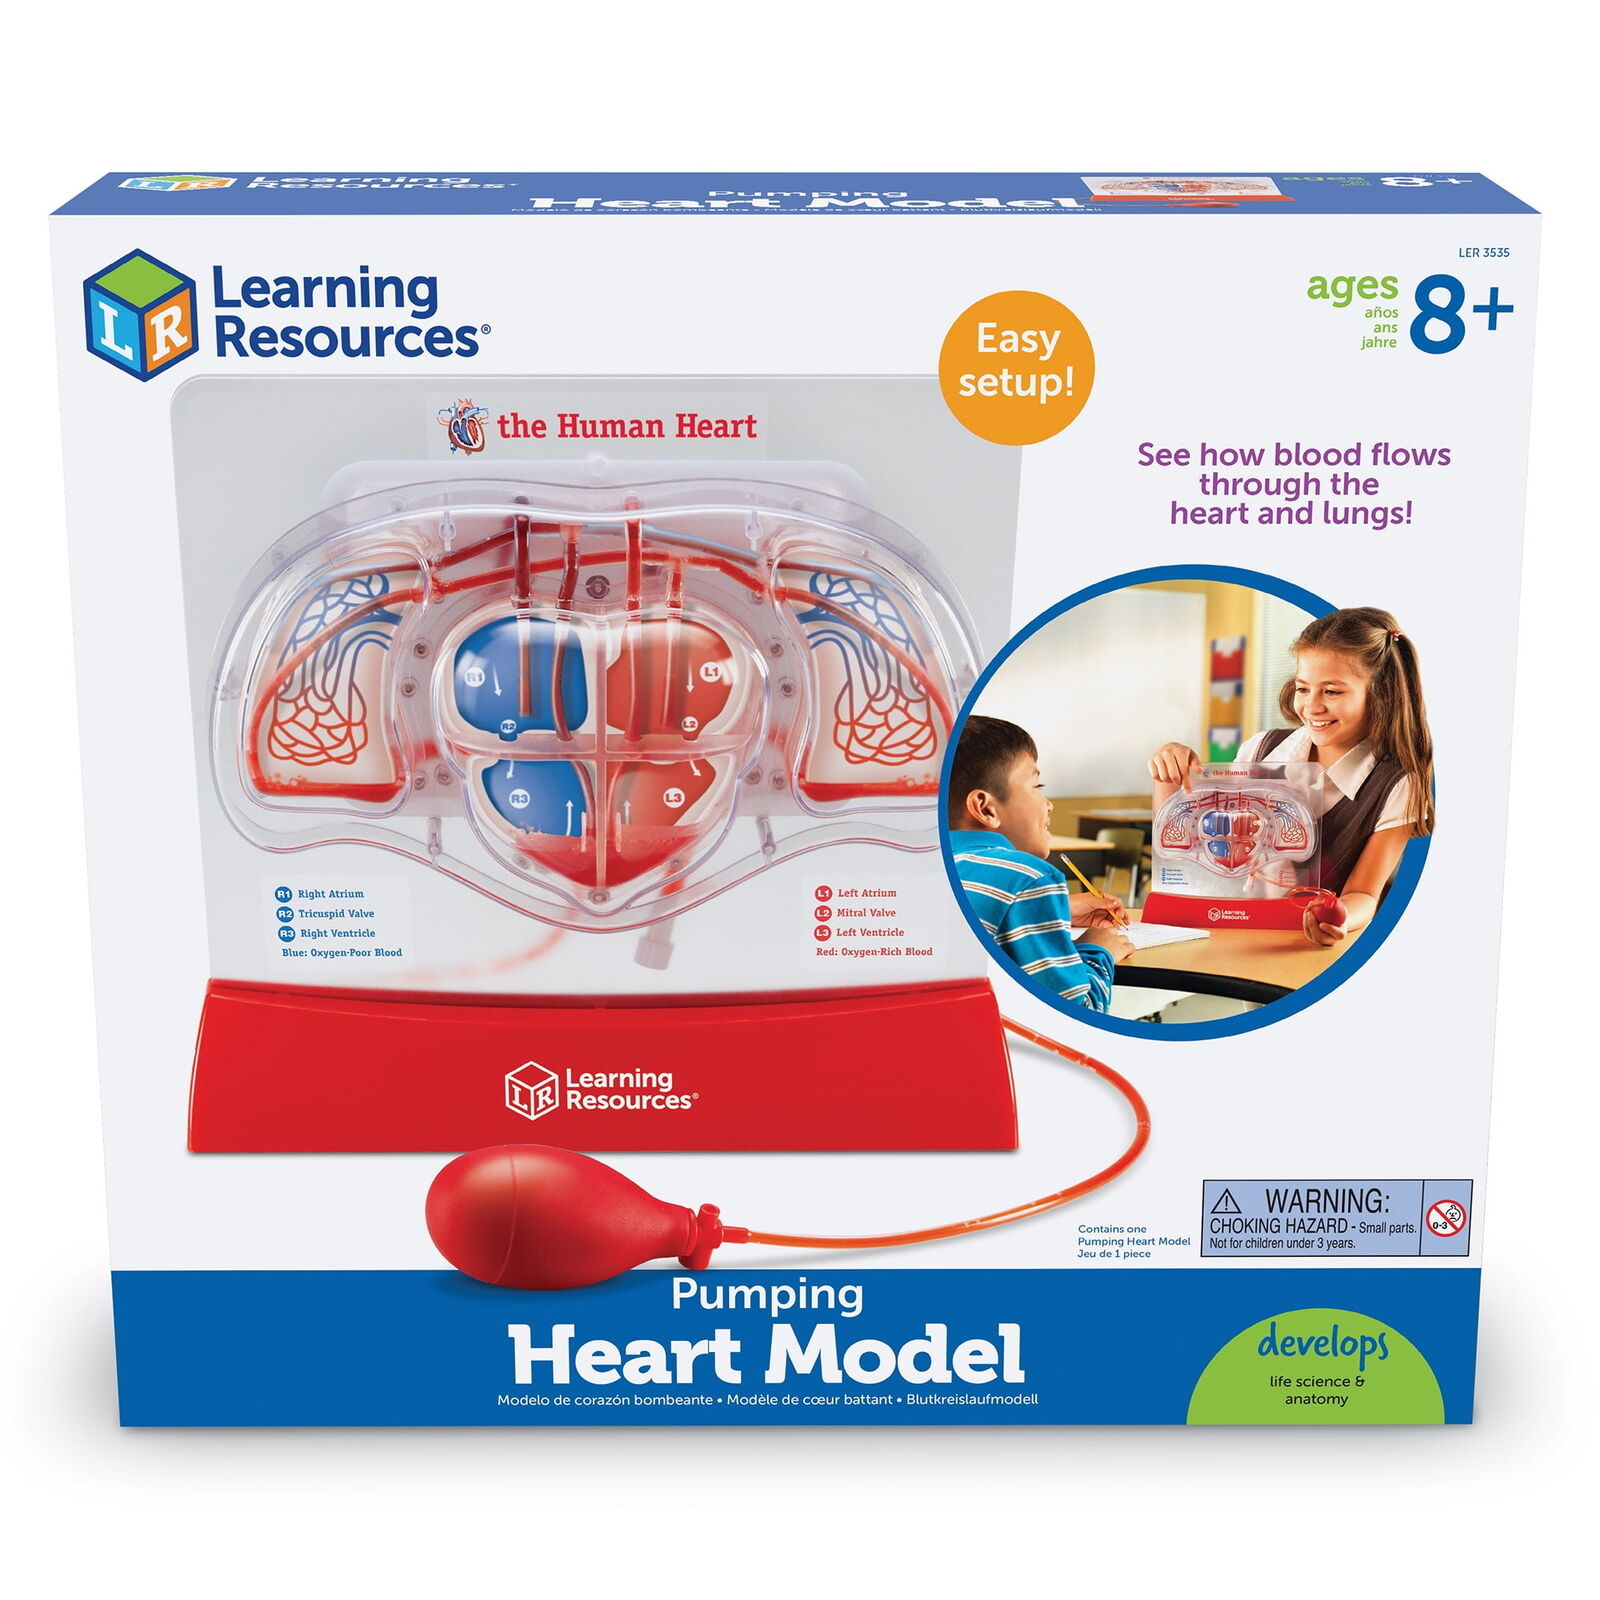 Pumping Heart Model - 1 Piece, Grades 3+ | Ages 8+ Educational Science Kit,